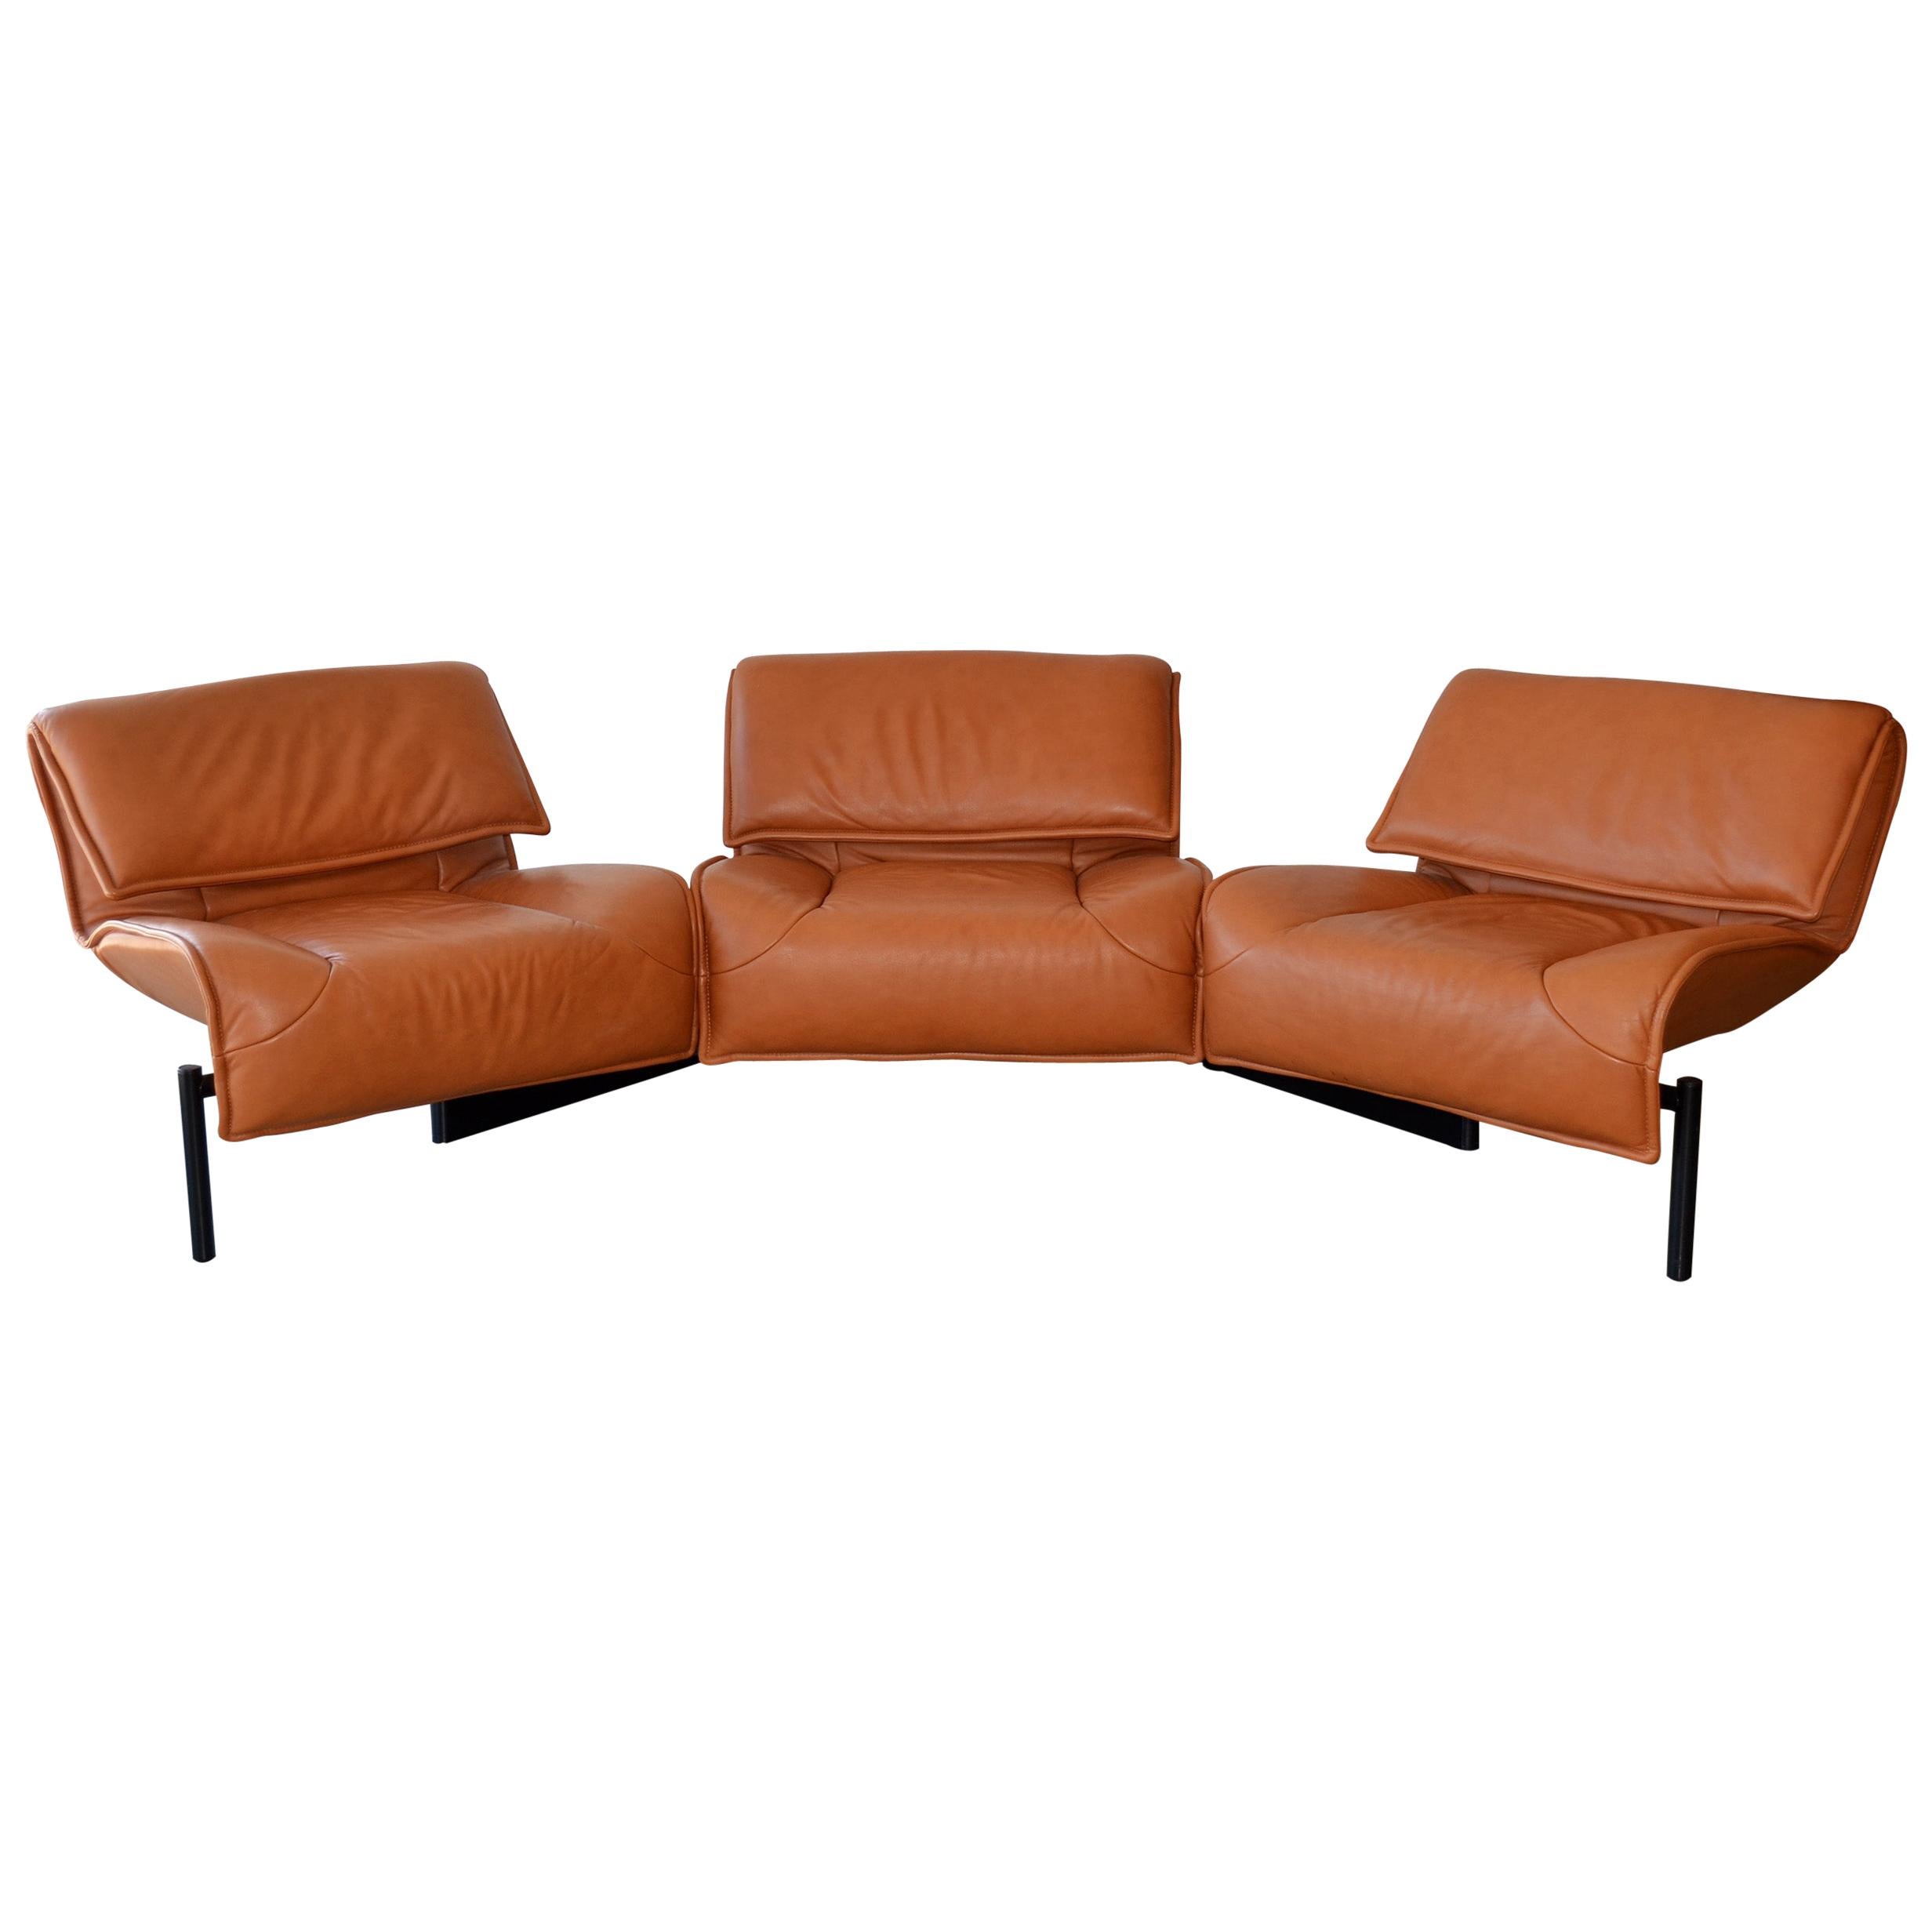 Pair of Leather Sofas or Couches by Vico Magistretti for Cassina, Italy, 1980's